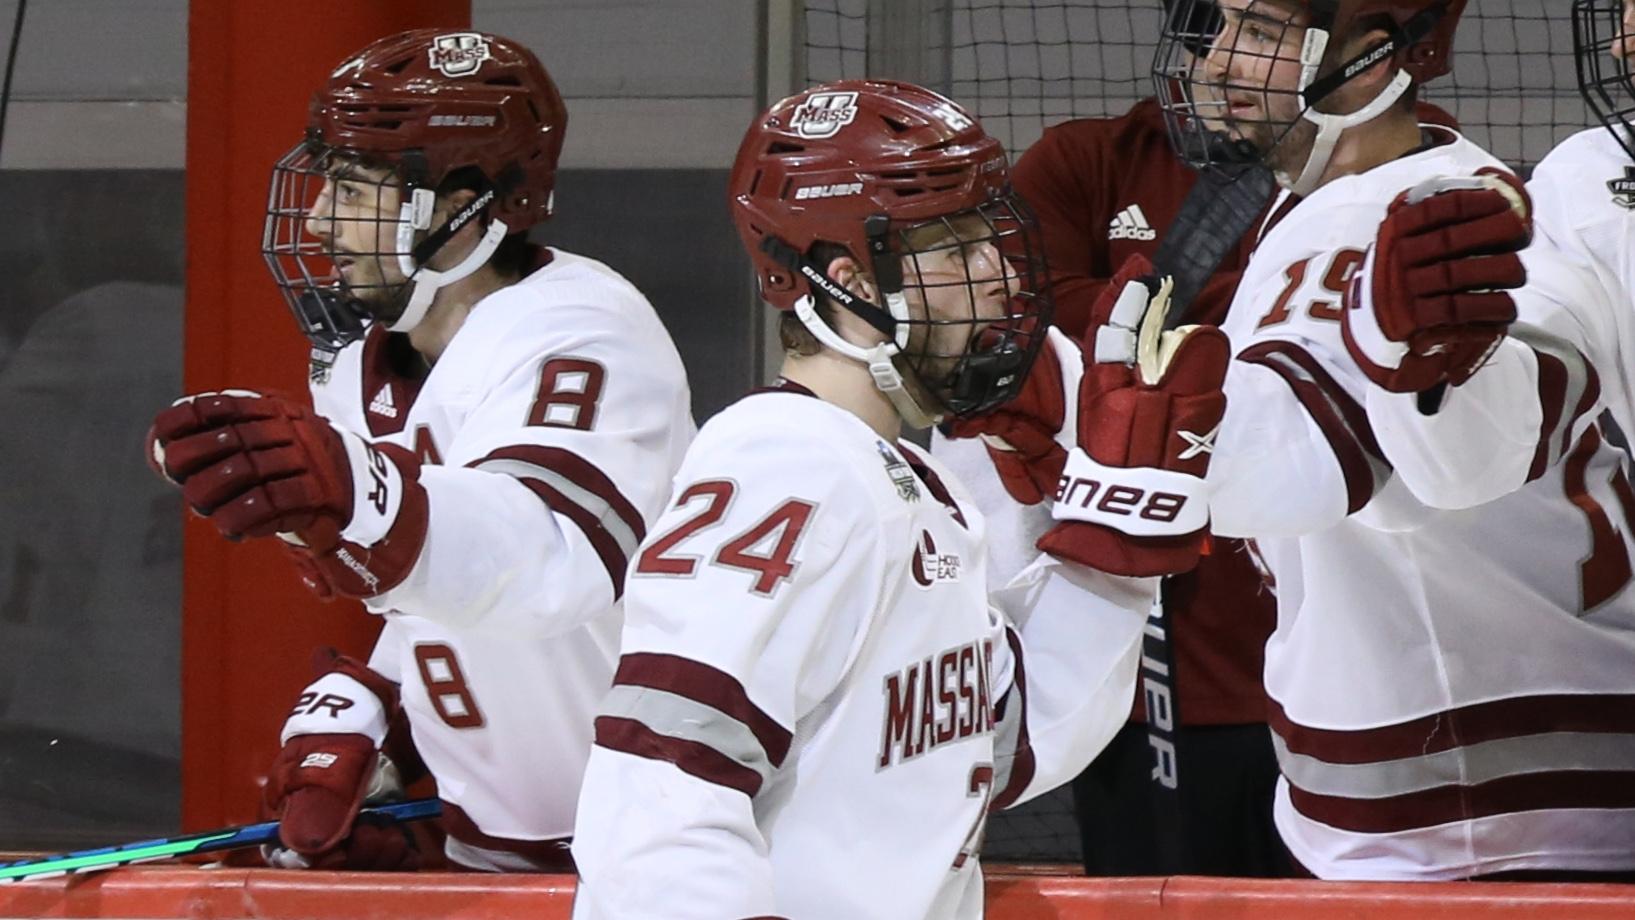 UMass Minutemen defenseman Zac Jones (24) celebrates his goal with the bench during the first period in the semifinals of the 2021 Frozen Four NCAA hockey tournament against the Minnesota Duluth / Charles LeClaire-USA TODAY Sports